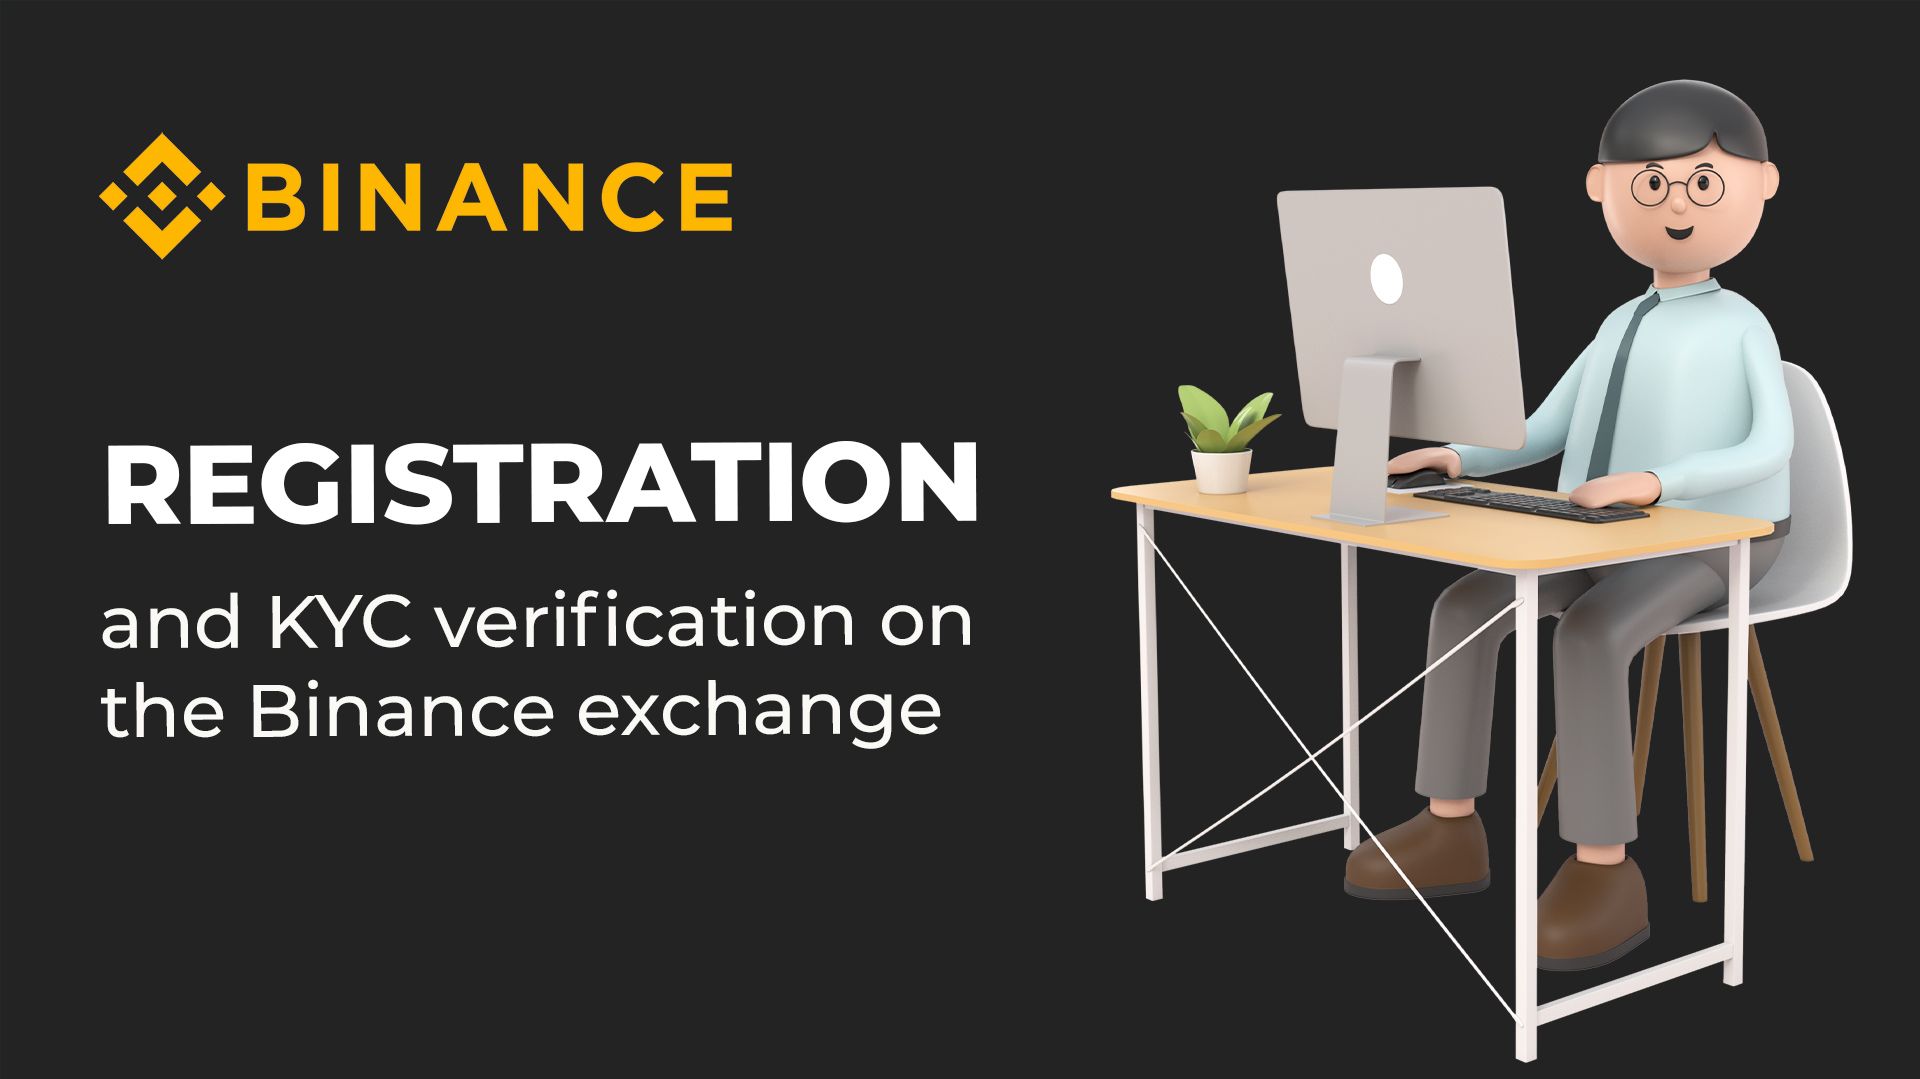 REGISTRATION AND KYC VERIFICATION ON THE BINANCE EXCHANGE.